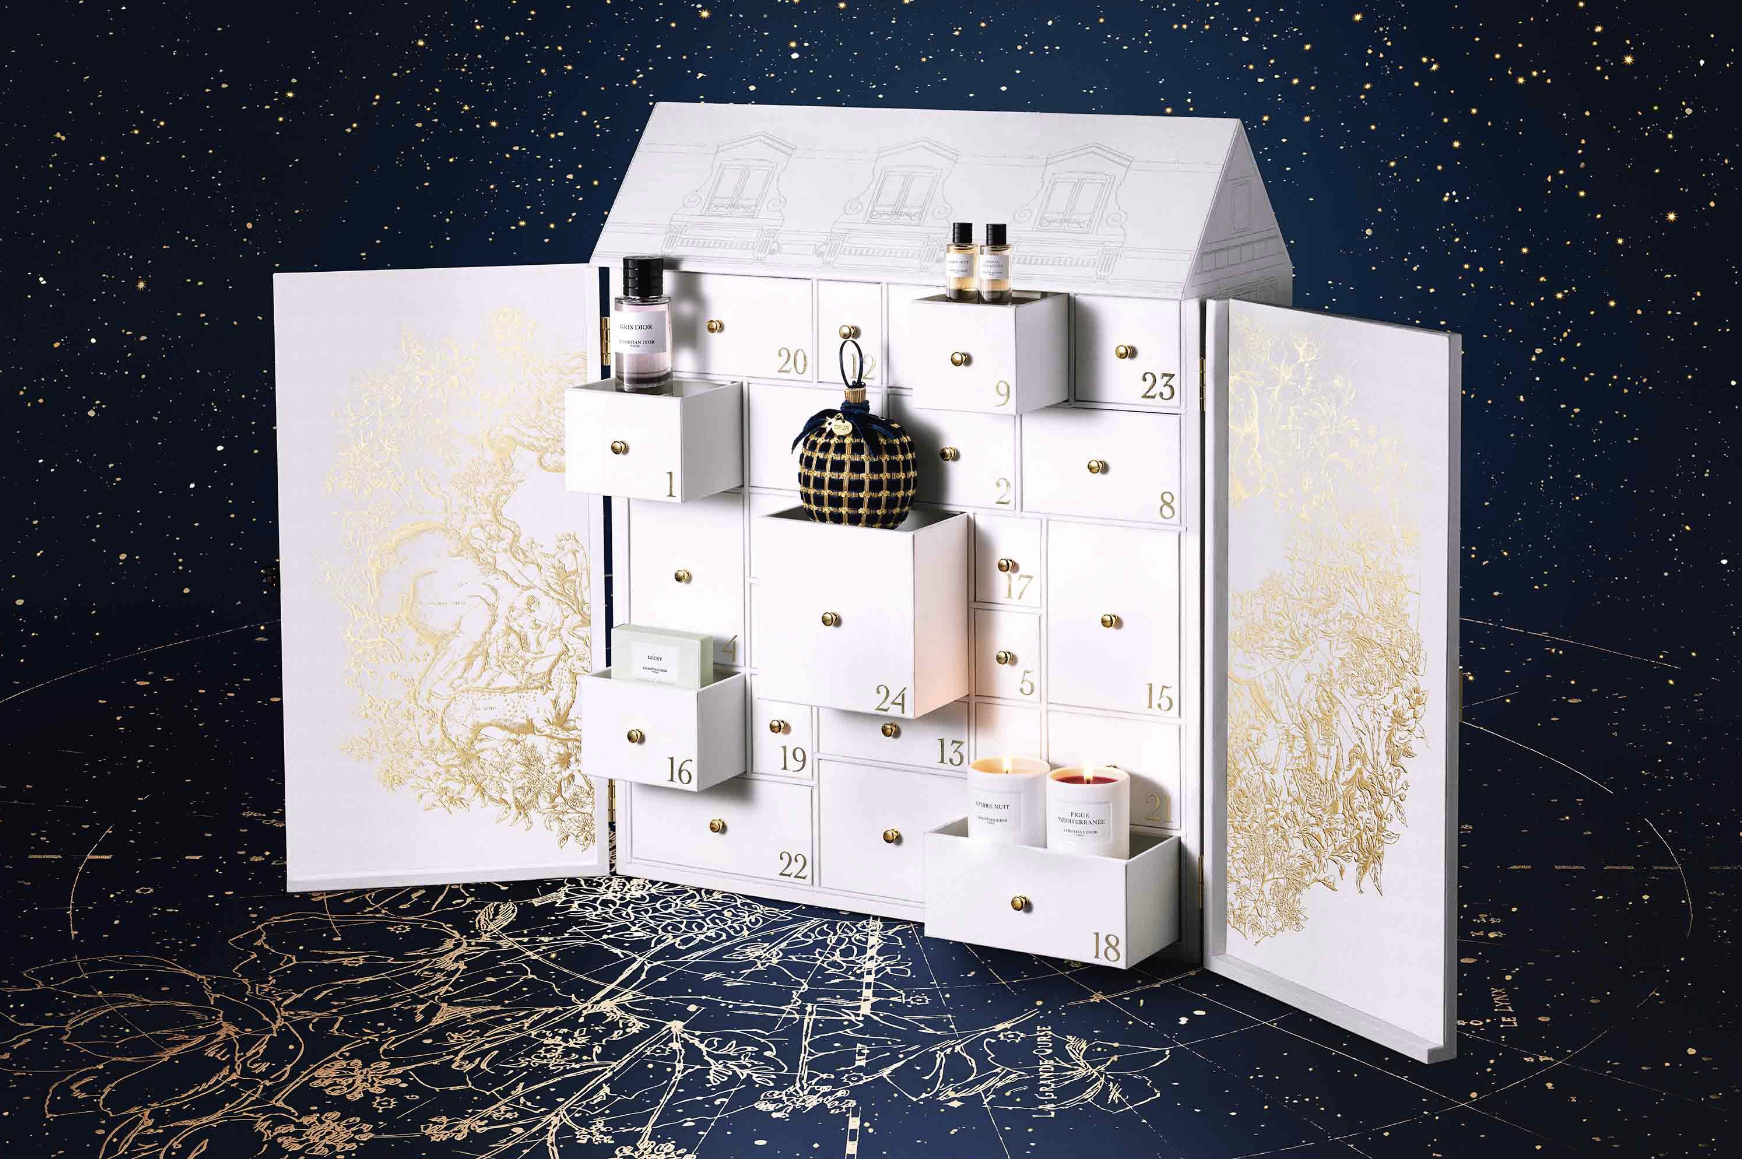 The advent calendar includes differently sized drawers for each day, with each drawer holding a different item